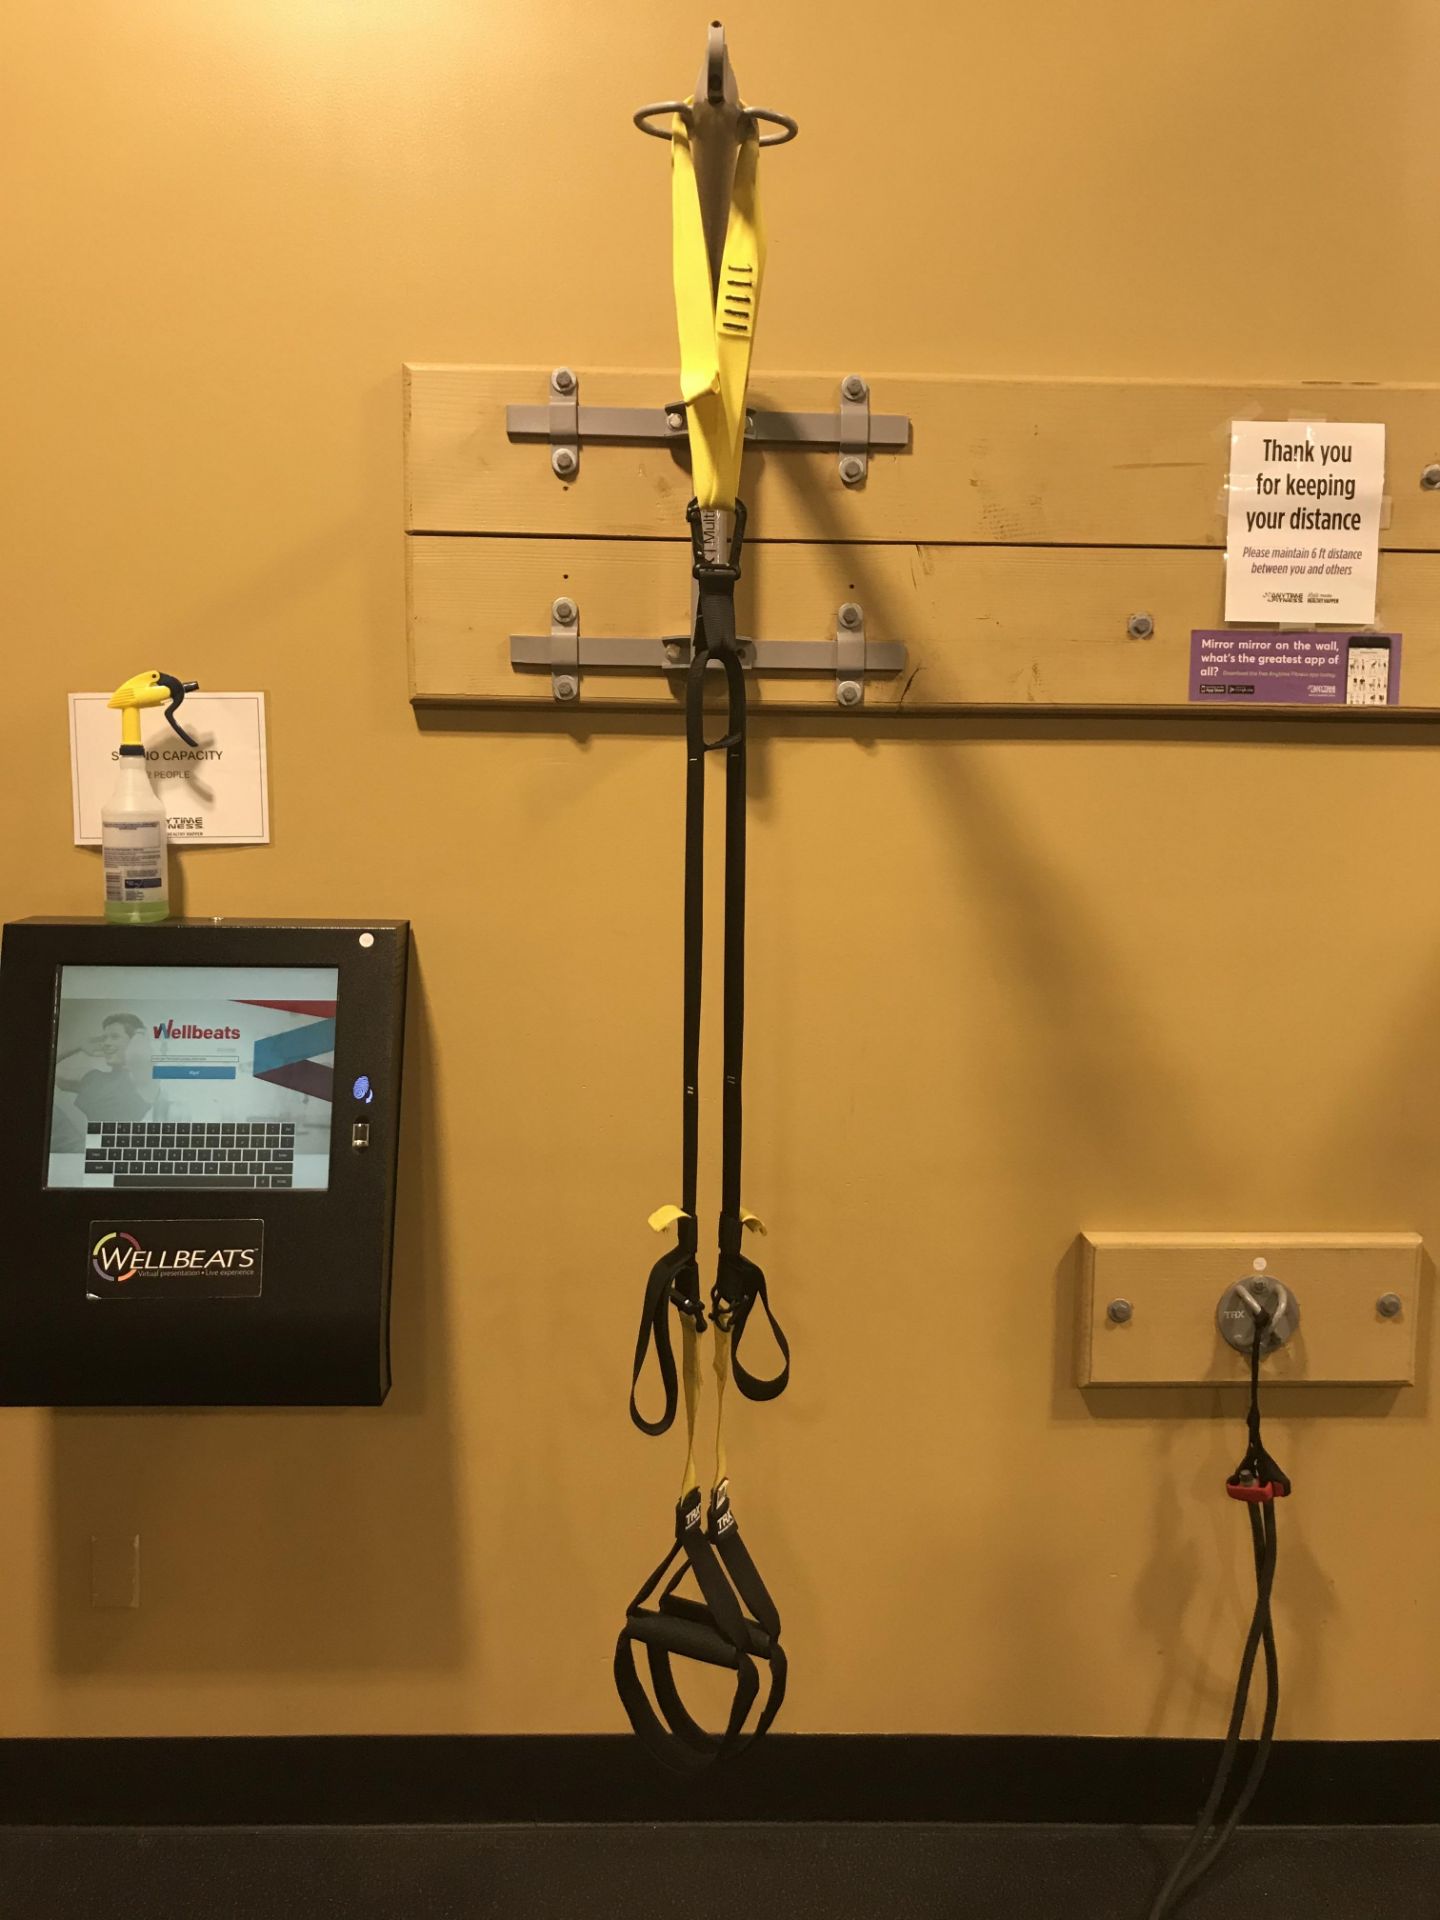 TRX Wall Mounted Suspension Trainer w/Multimount (BUYER MUST REMOVE FROM WALL IN WORKMAN LIKE MANNER